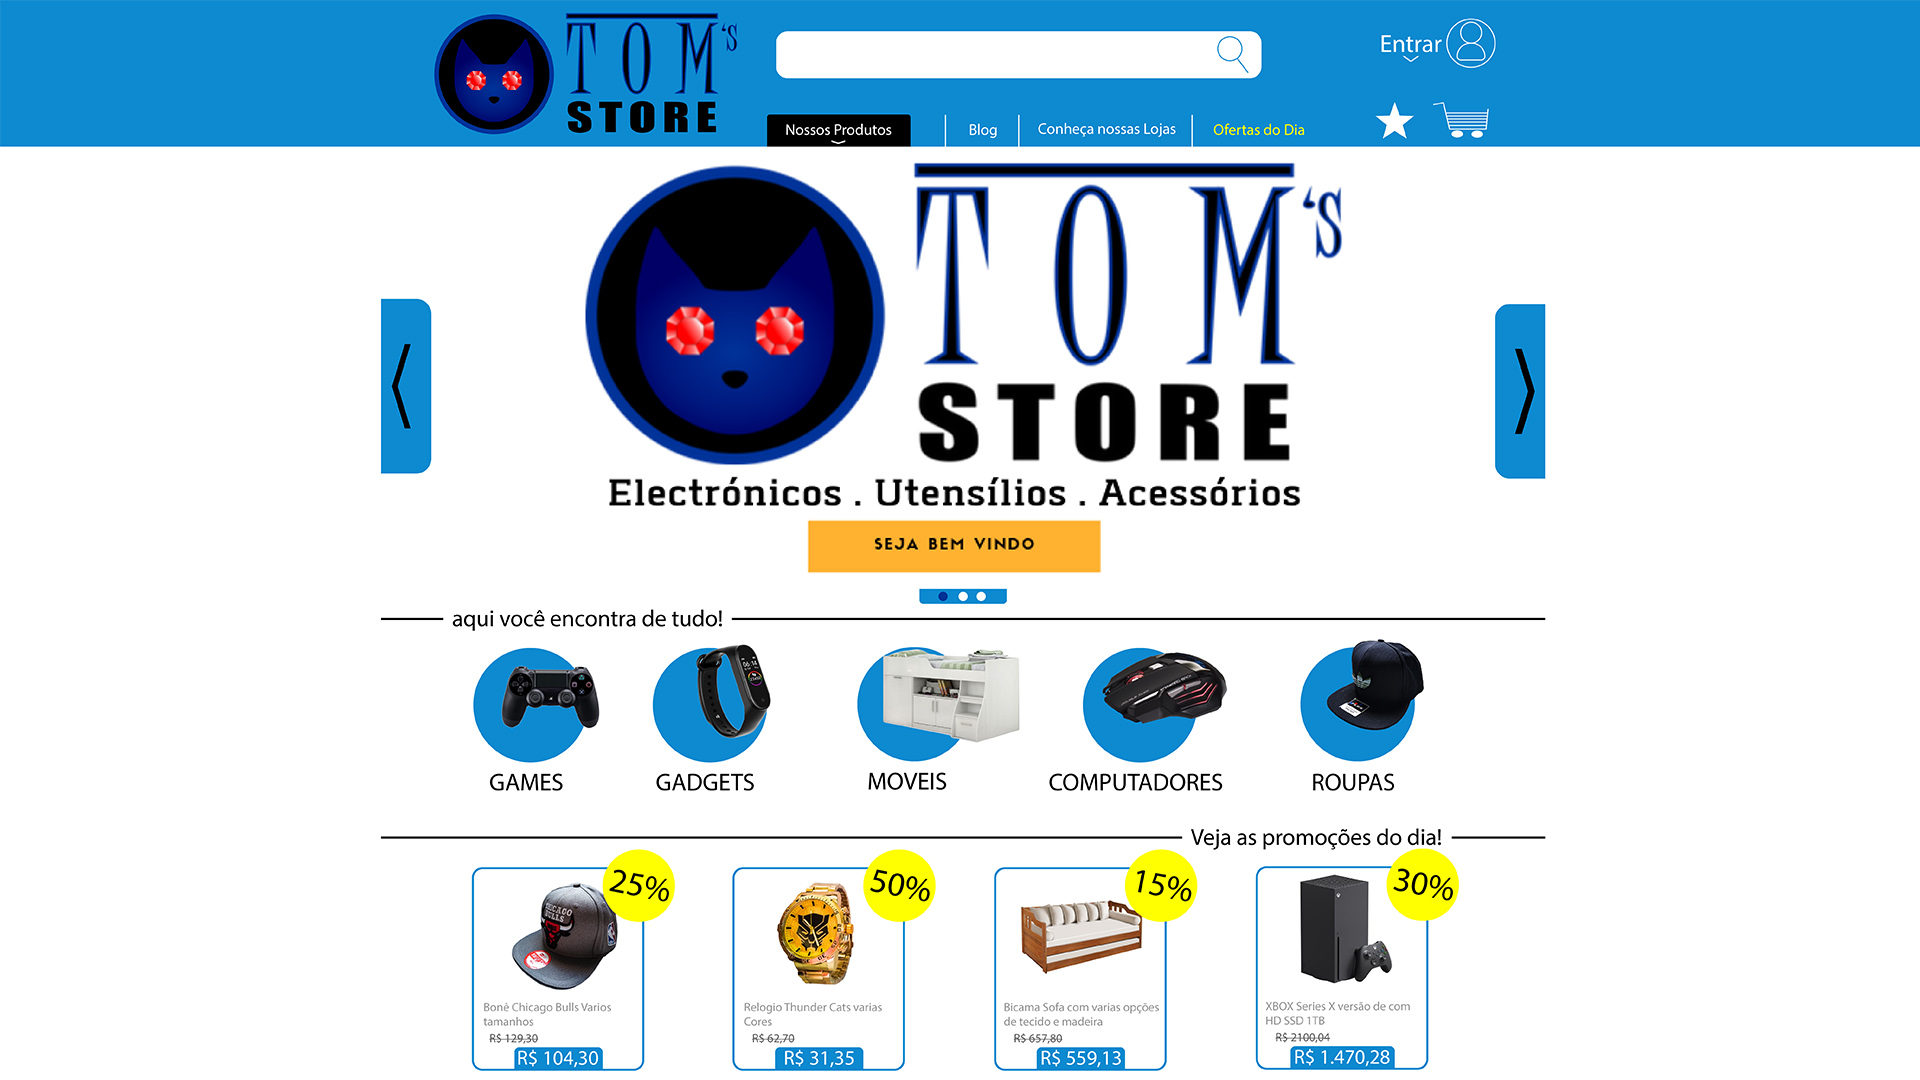 Tom's Stores